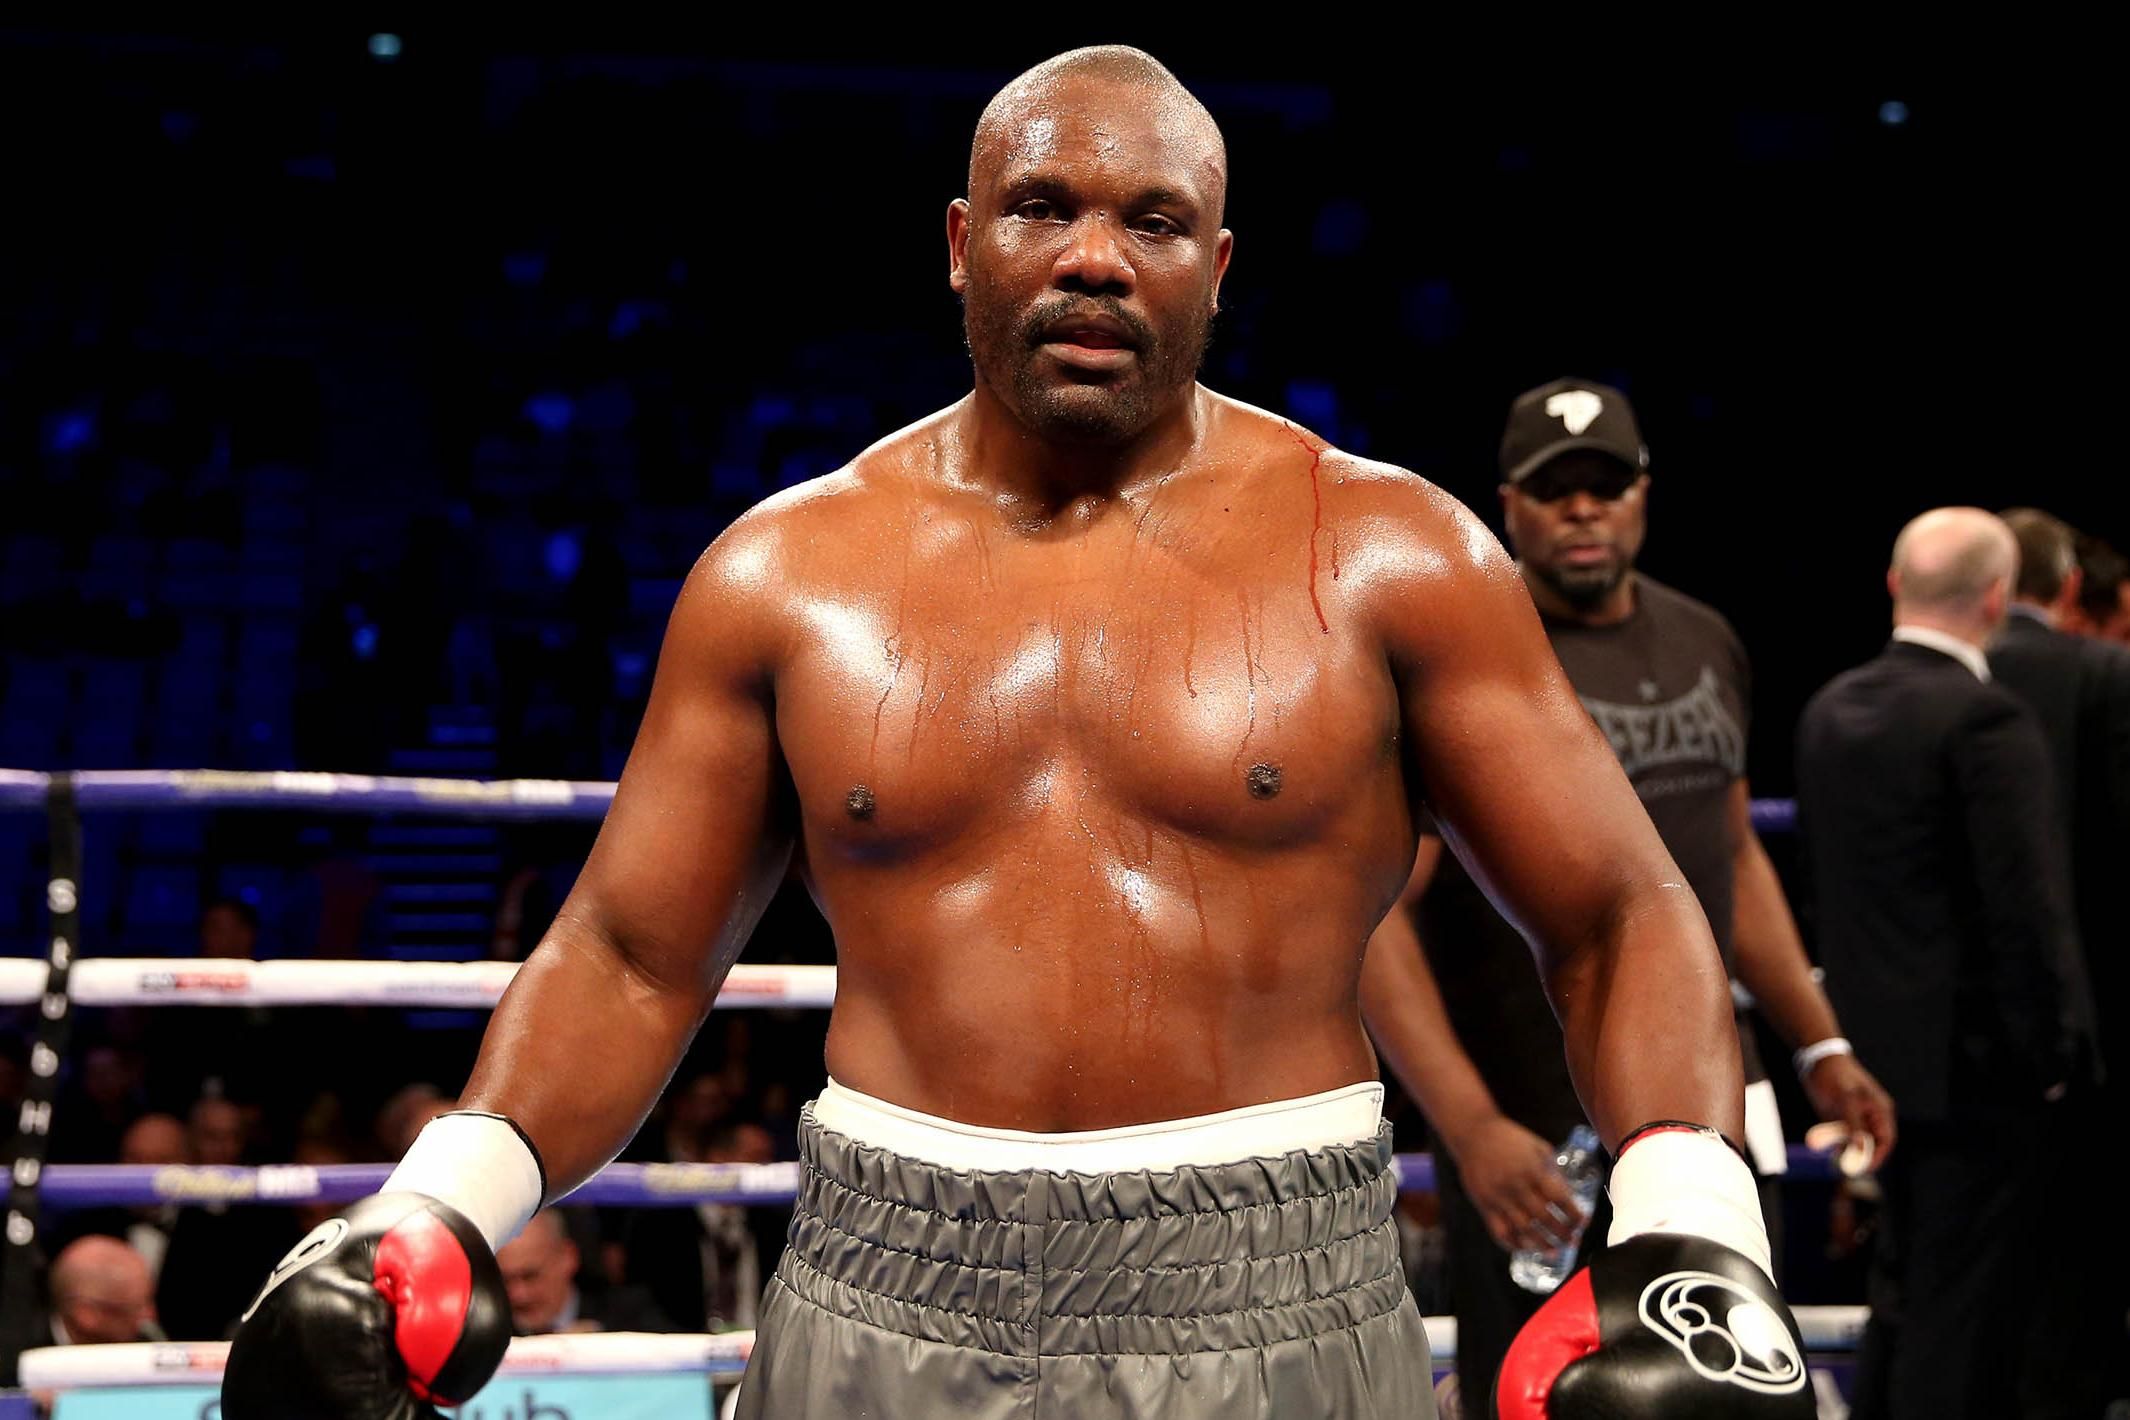 Chisora: I'm going to take what belongs to Fury and make it mine